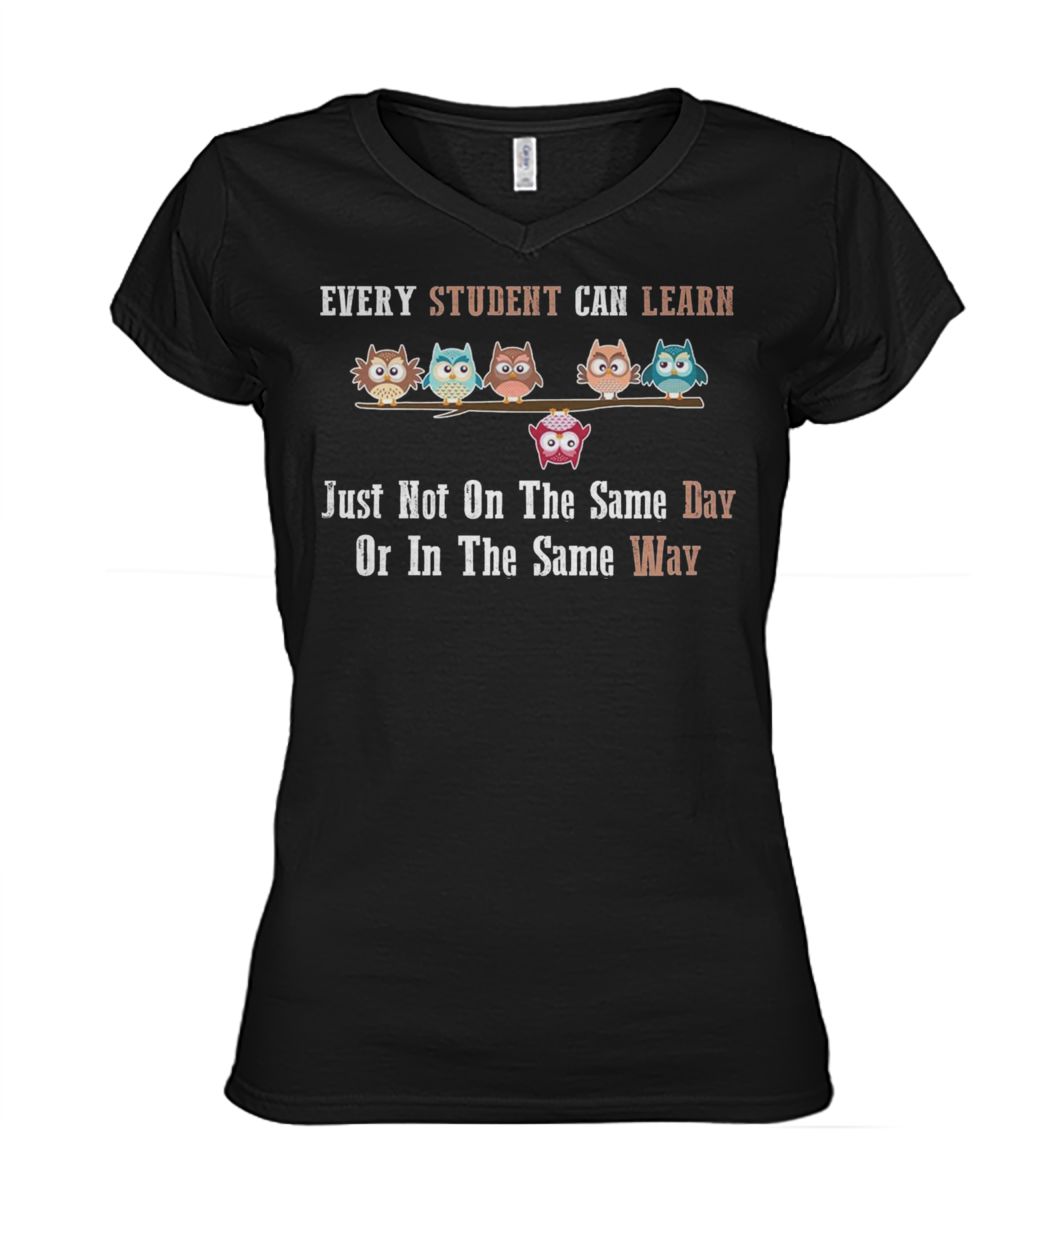 Every student can learn just not on the same day or in the same way owl women's v-neck